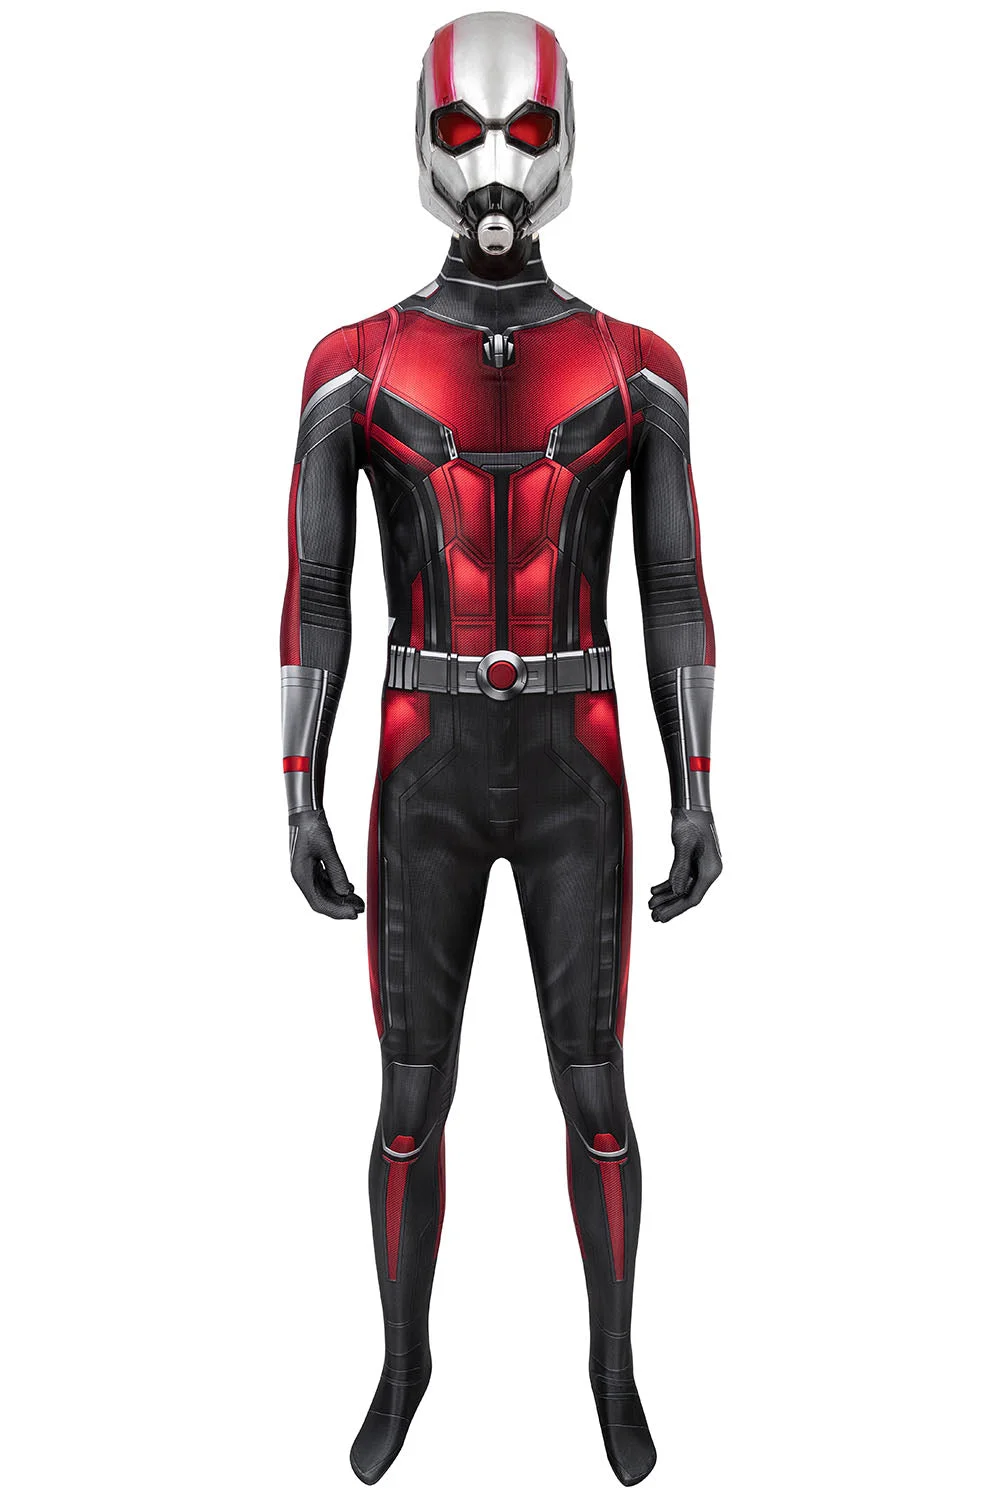 Ant-Man Cosplay Suit The Classic Ant Man Scott Cosplay Costume Printed Edition By CosplayLab